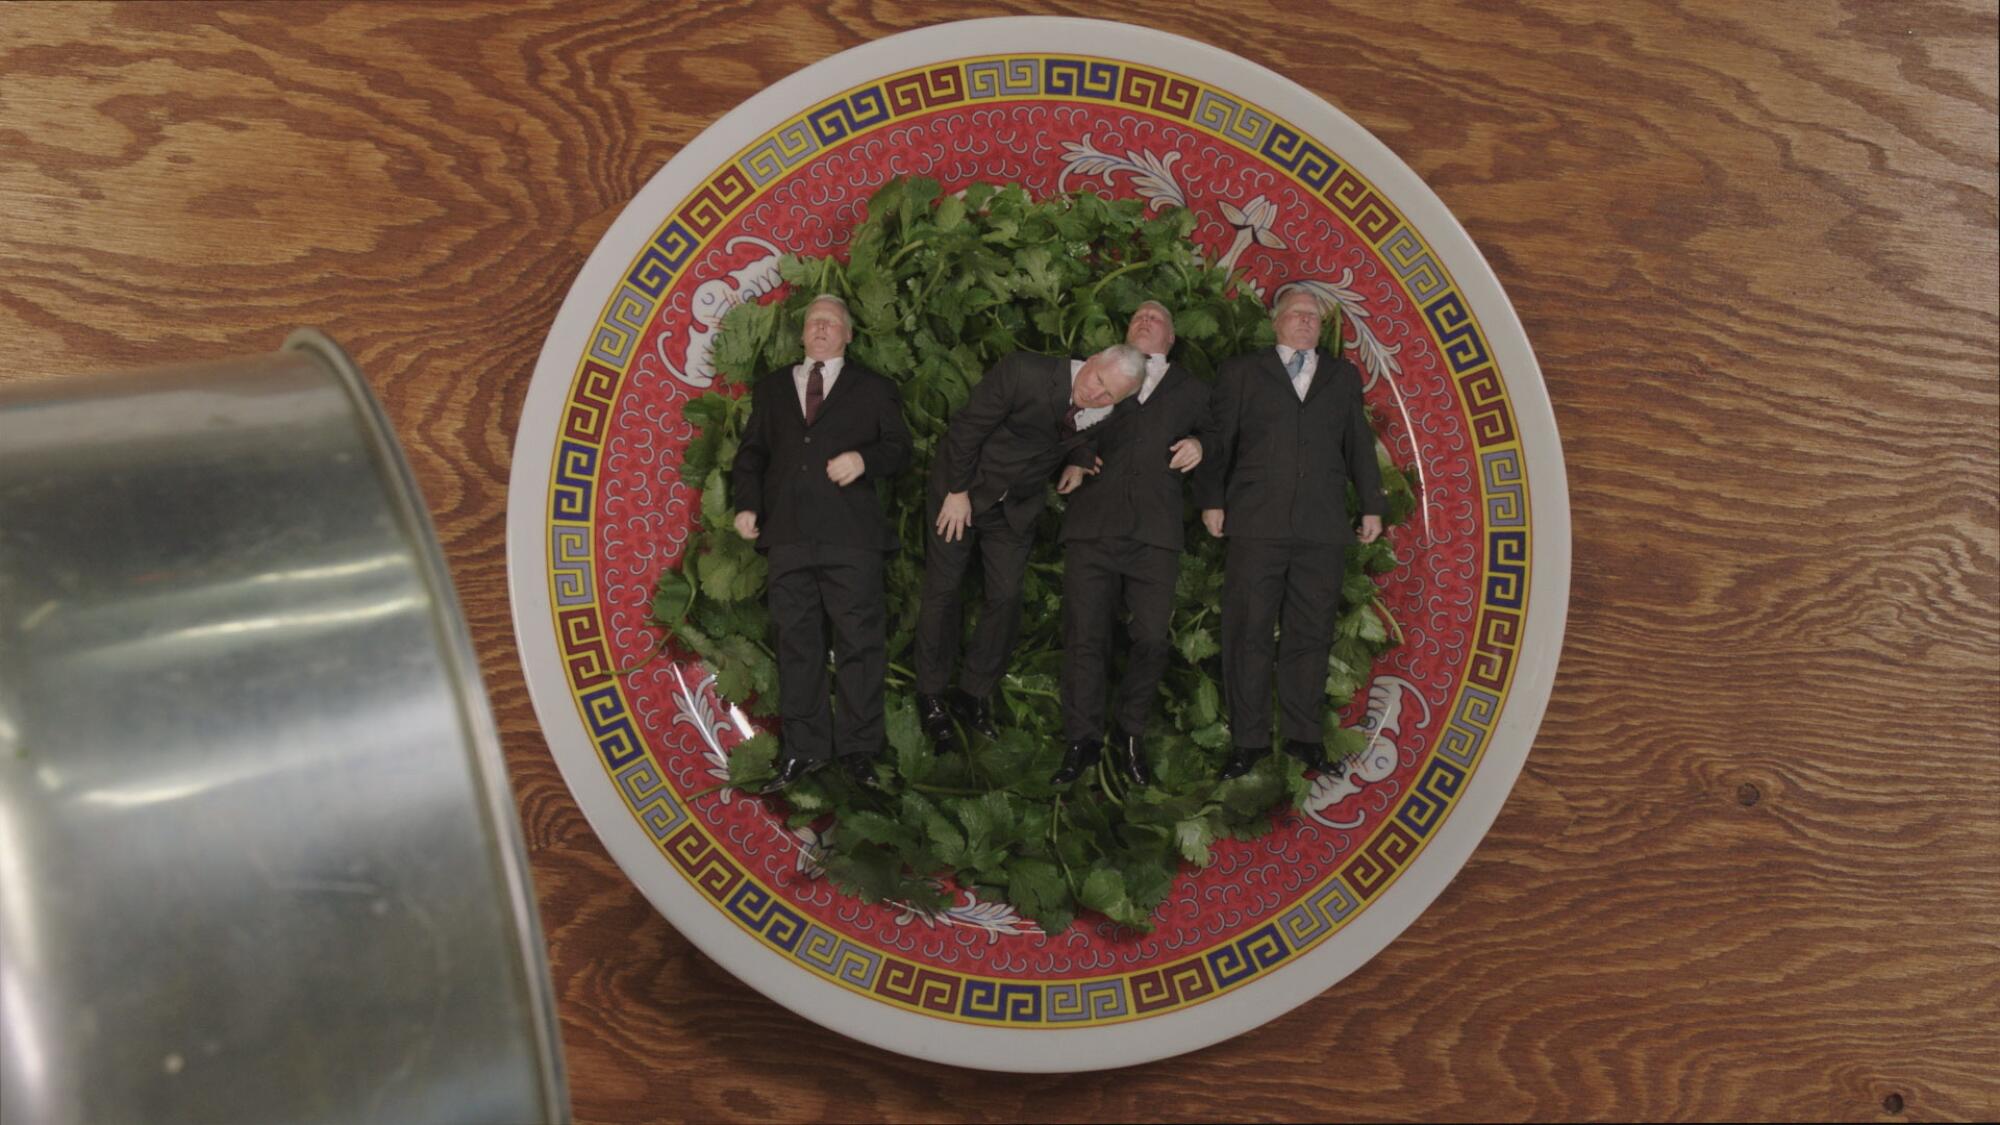 Four men in business suits are shown as if they are being served on a platter of cilantro.